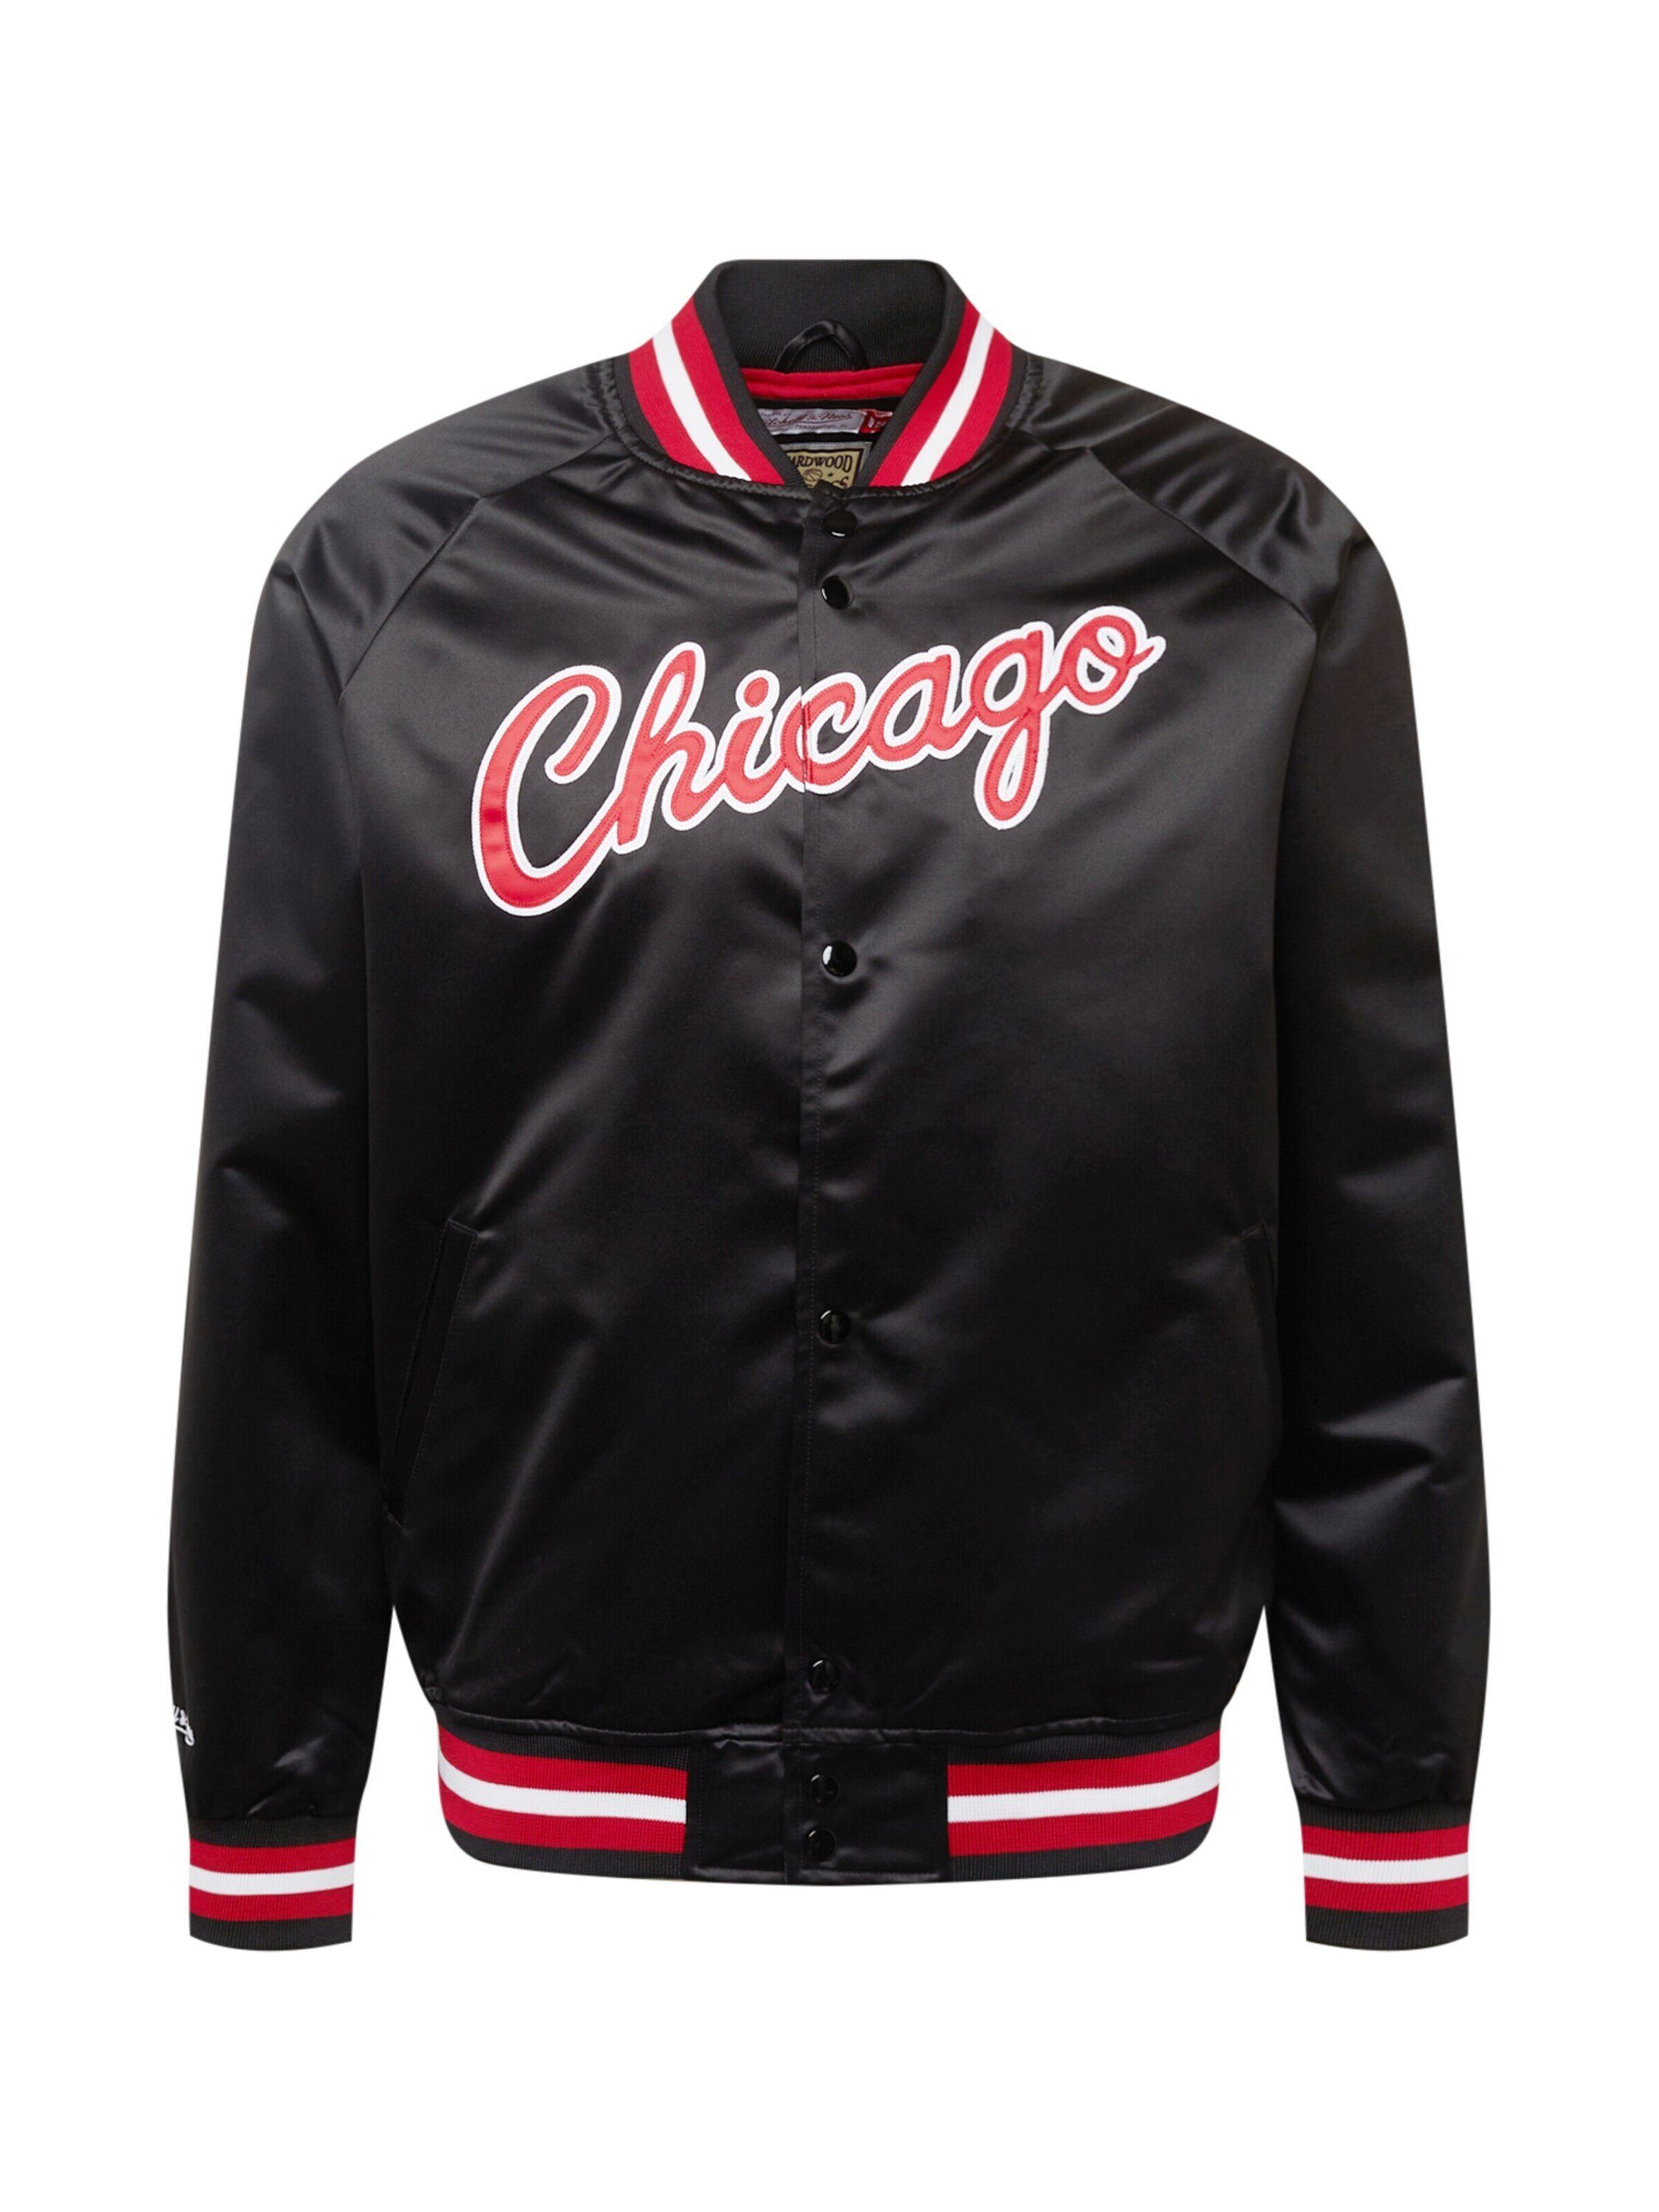 & Ness (1-St) Mitchell Red Collegejacke / Black